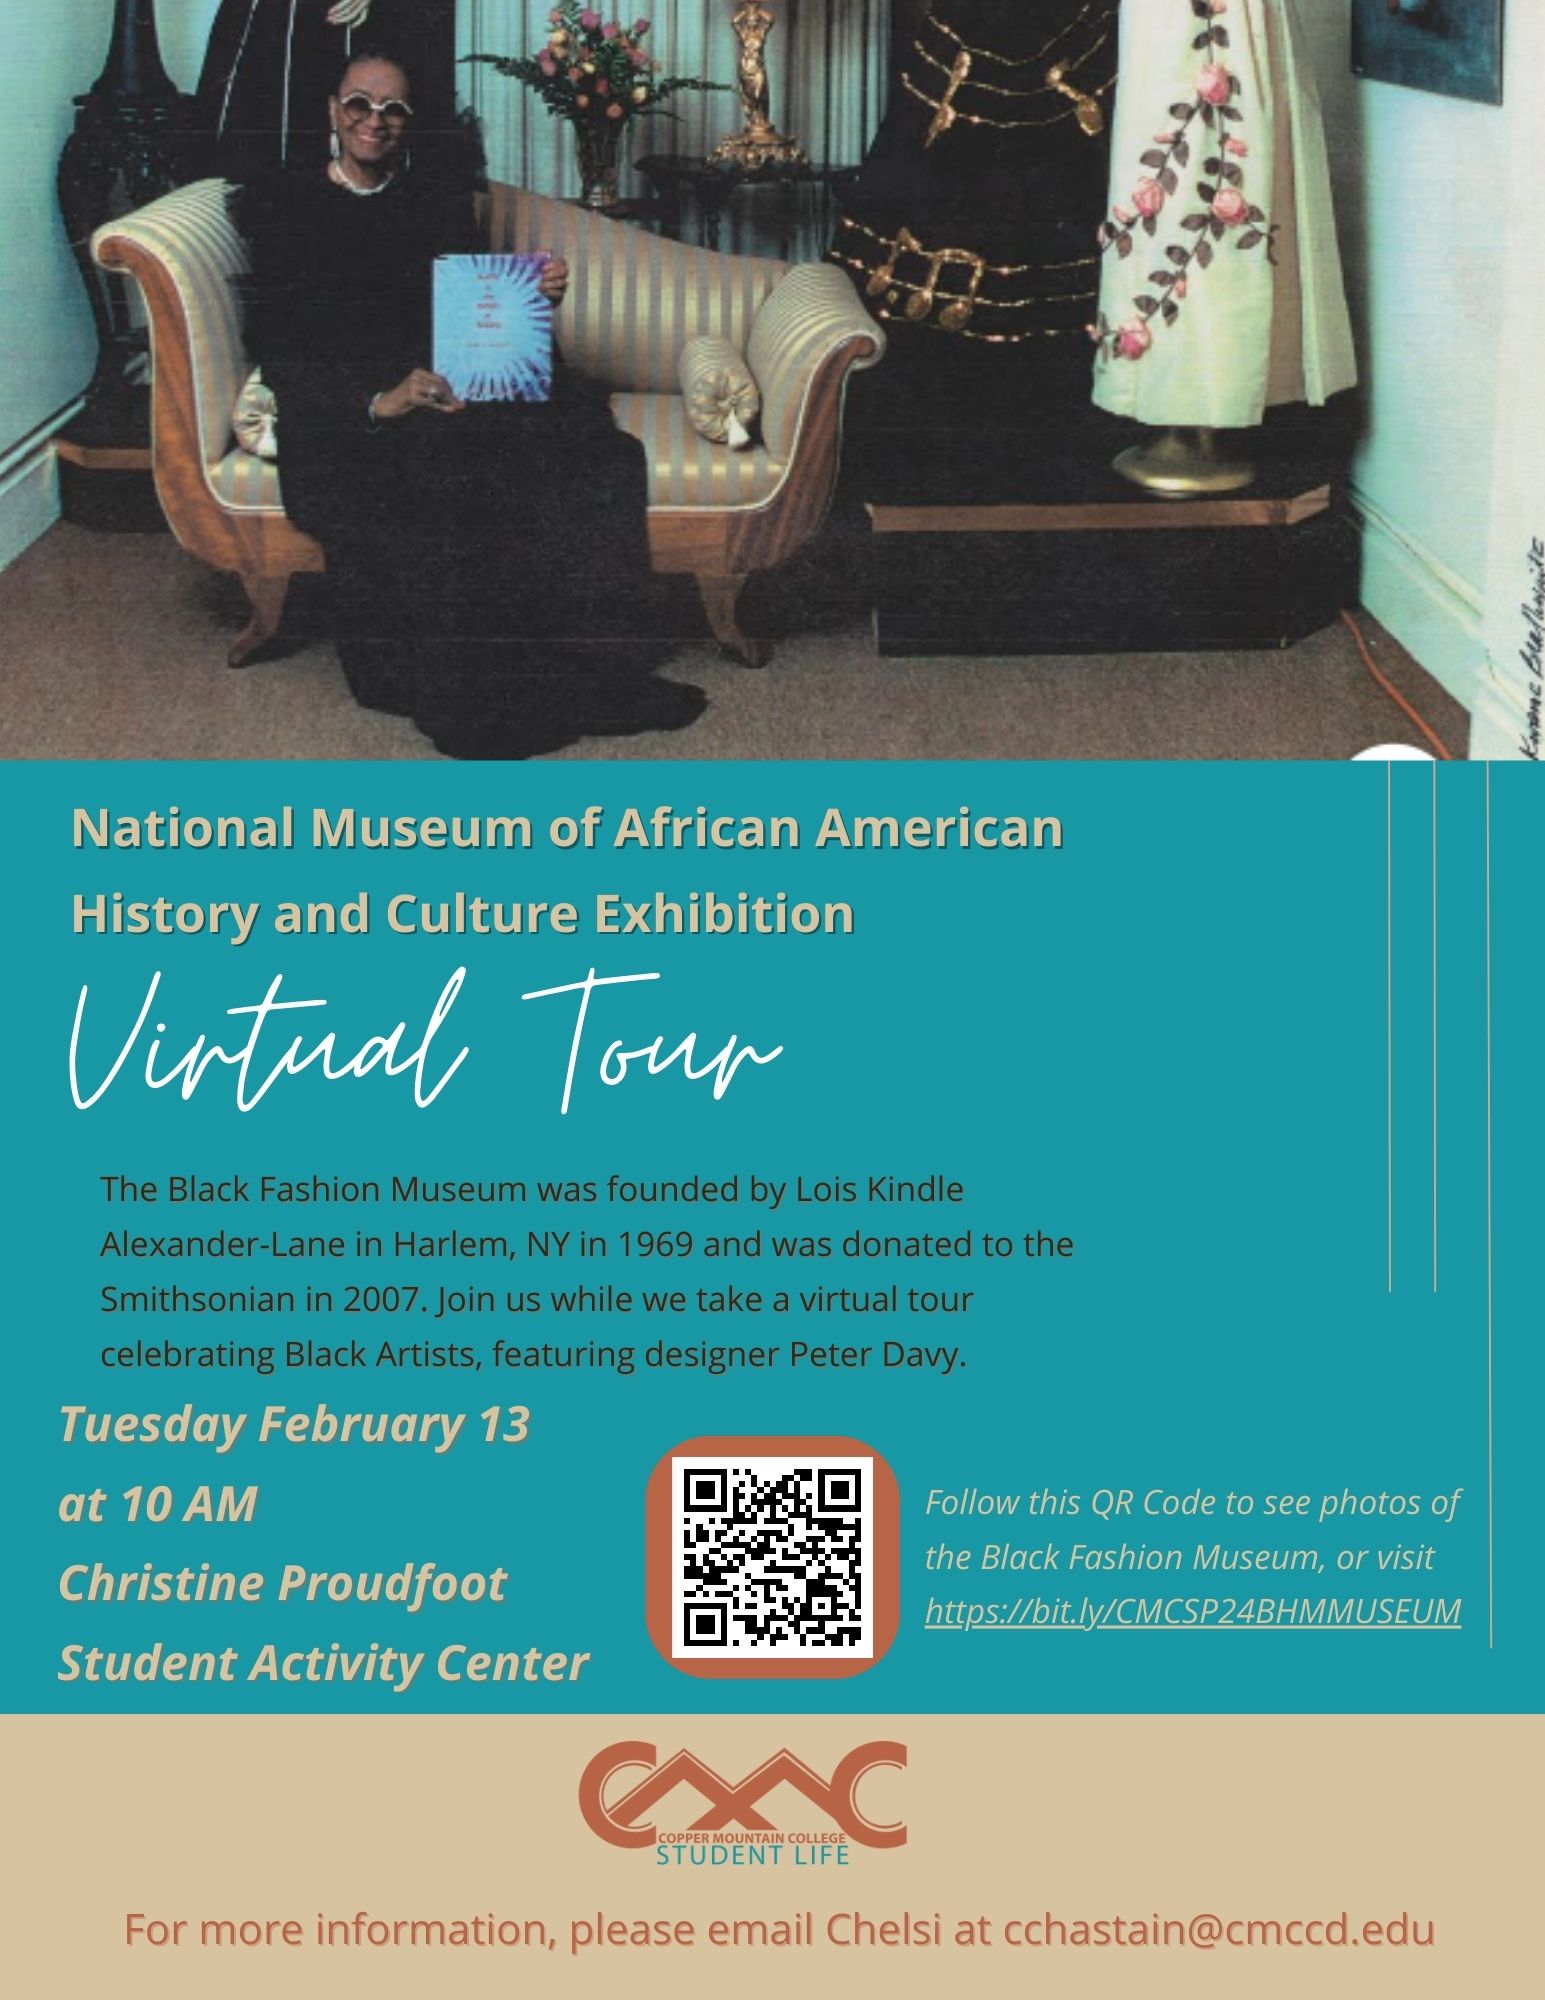 Take a virtual tour of the Black Fashion Museum on February 13th at 10 am